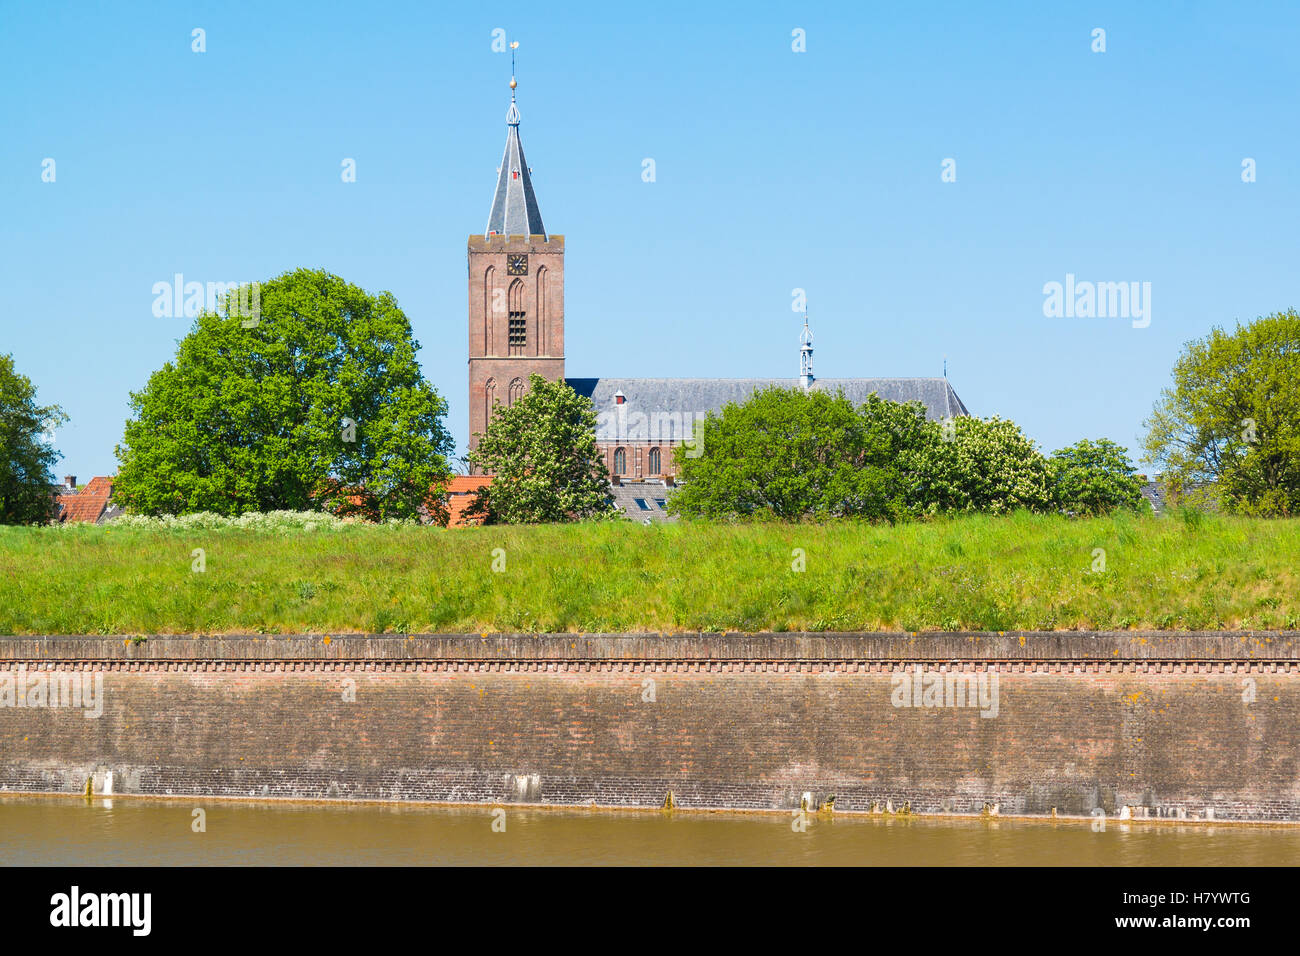 Big Church or Saint Vitus Church and rampart of old fortified town of Naarden, North Holland, Netherlands Stock Photo